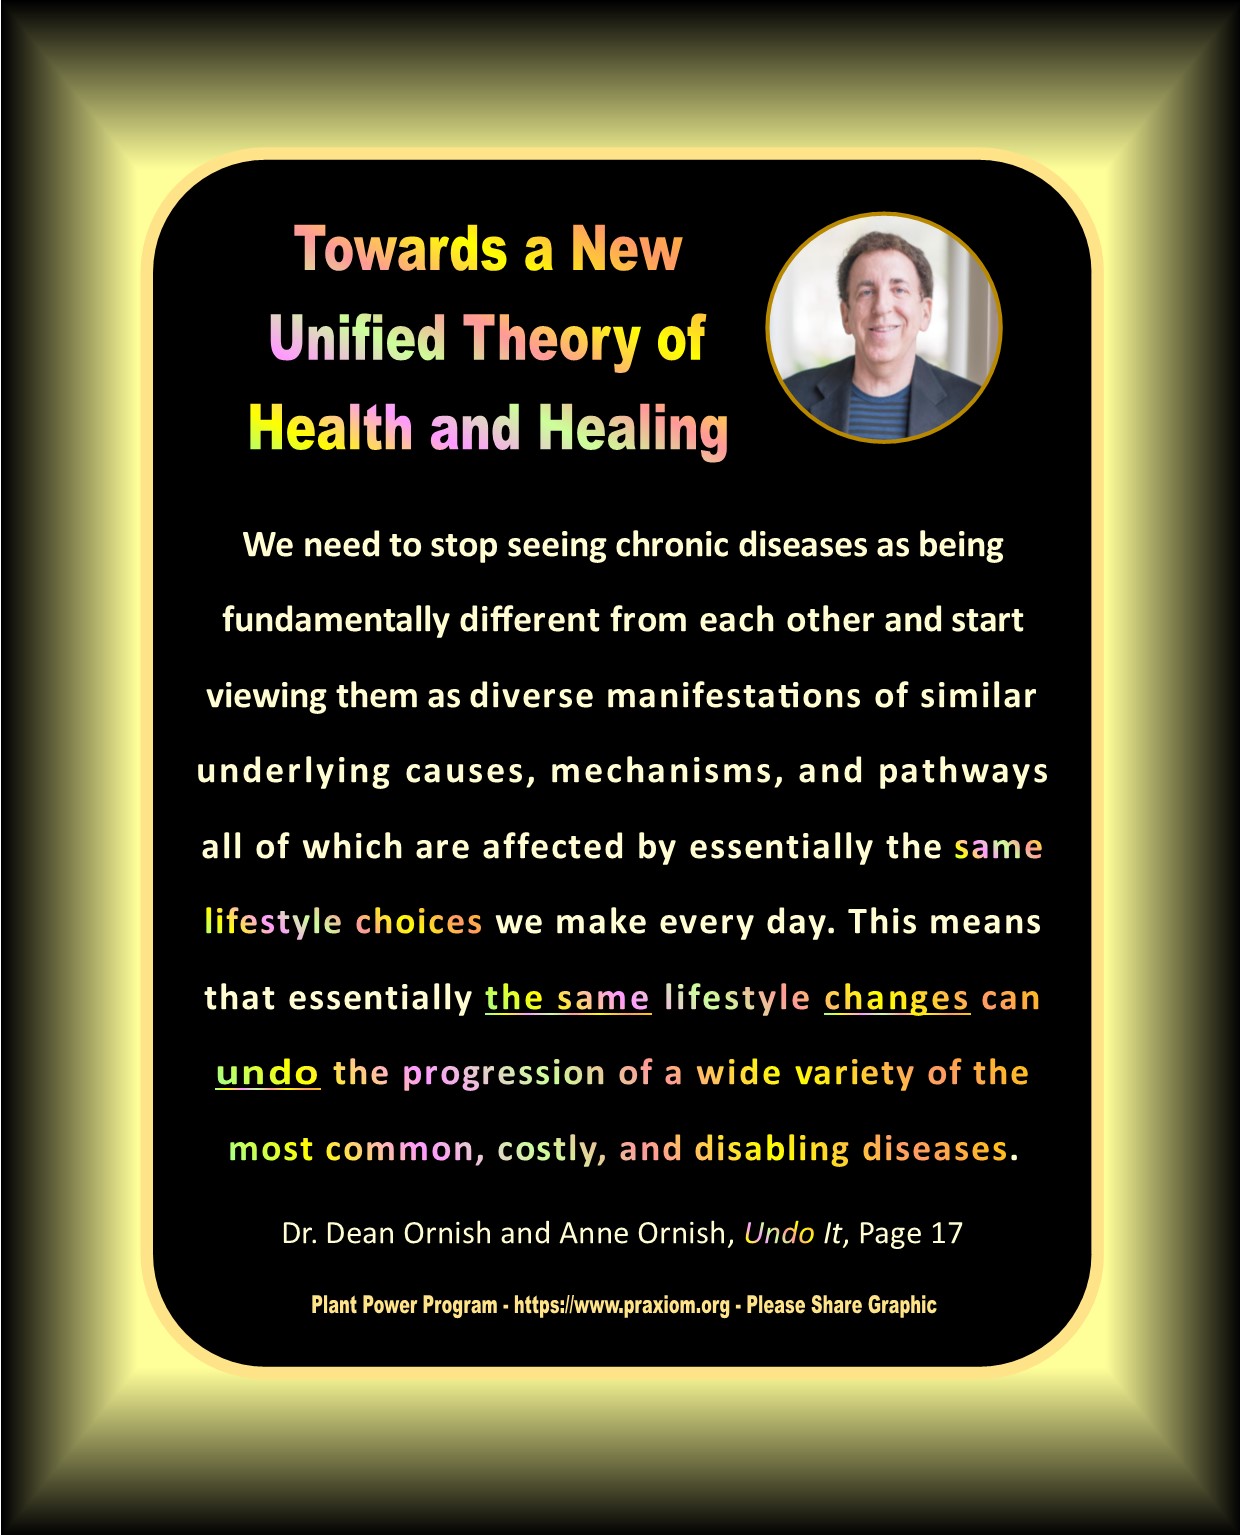 Towards a New Unified Theory of Health and Healing - Dr. Dean Ornish